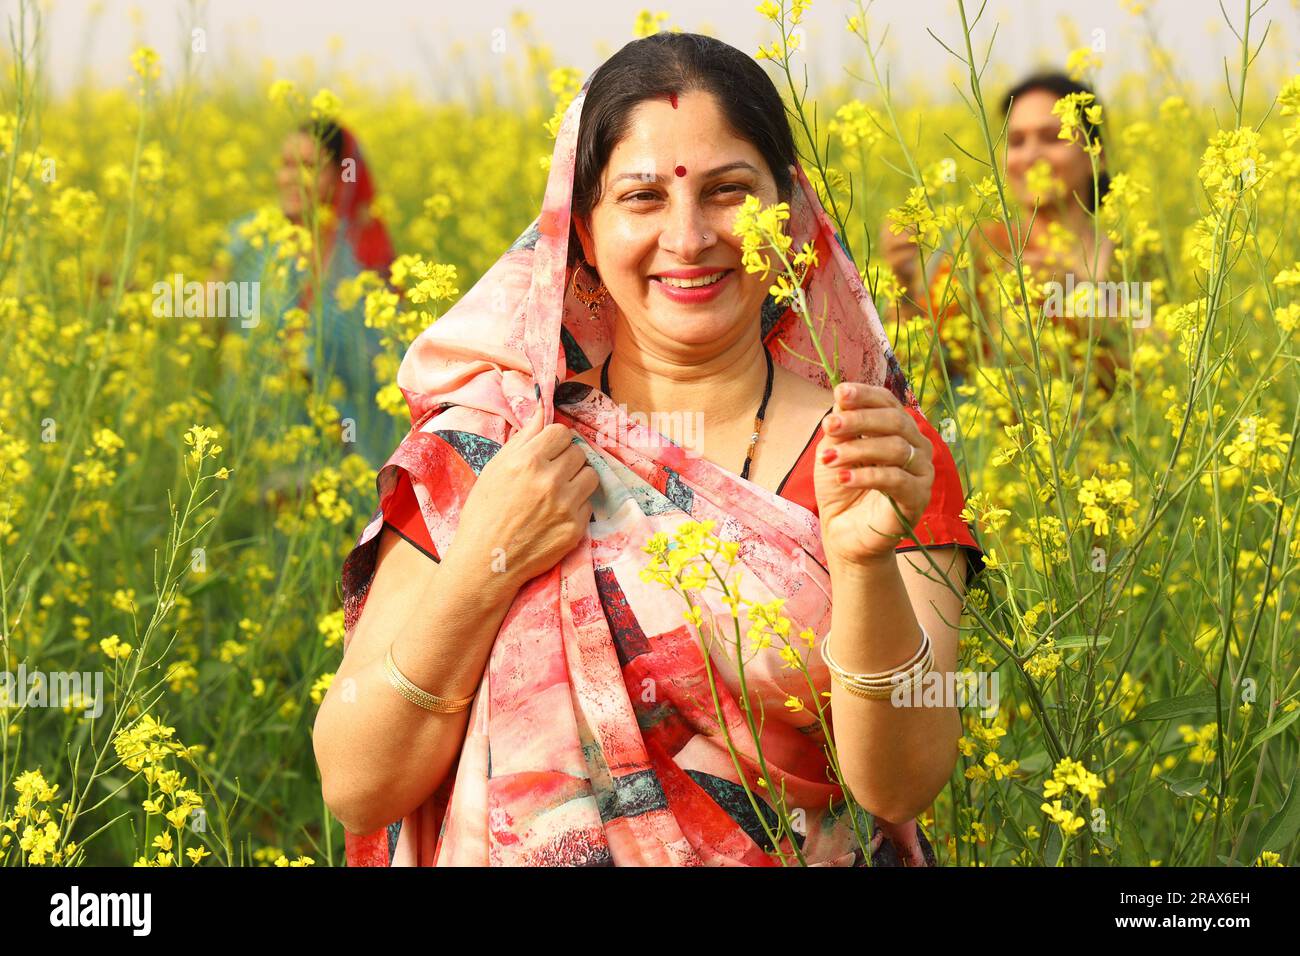 Happy rural Indian women standing in a mustard field enjoying the benefits of the mustard agricultural field. Stock Photo